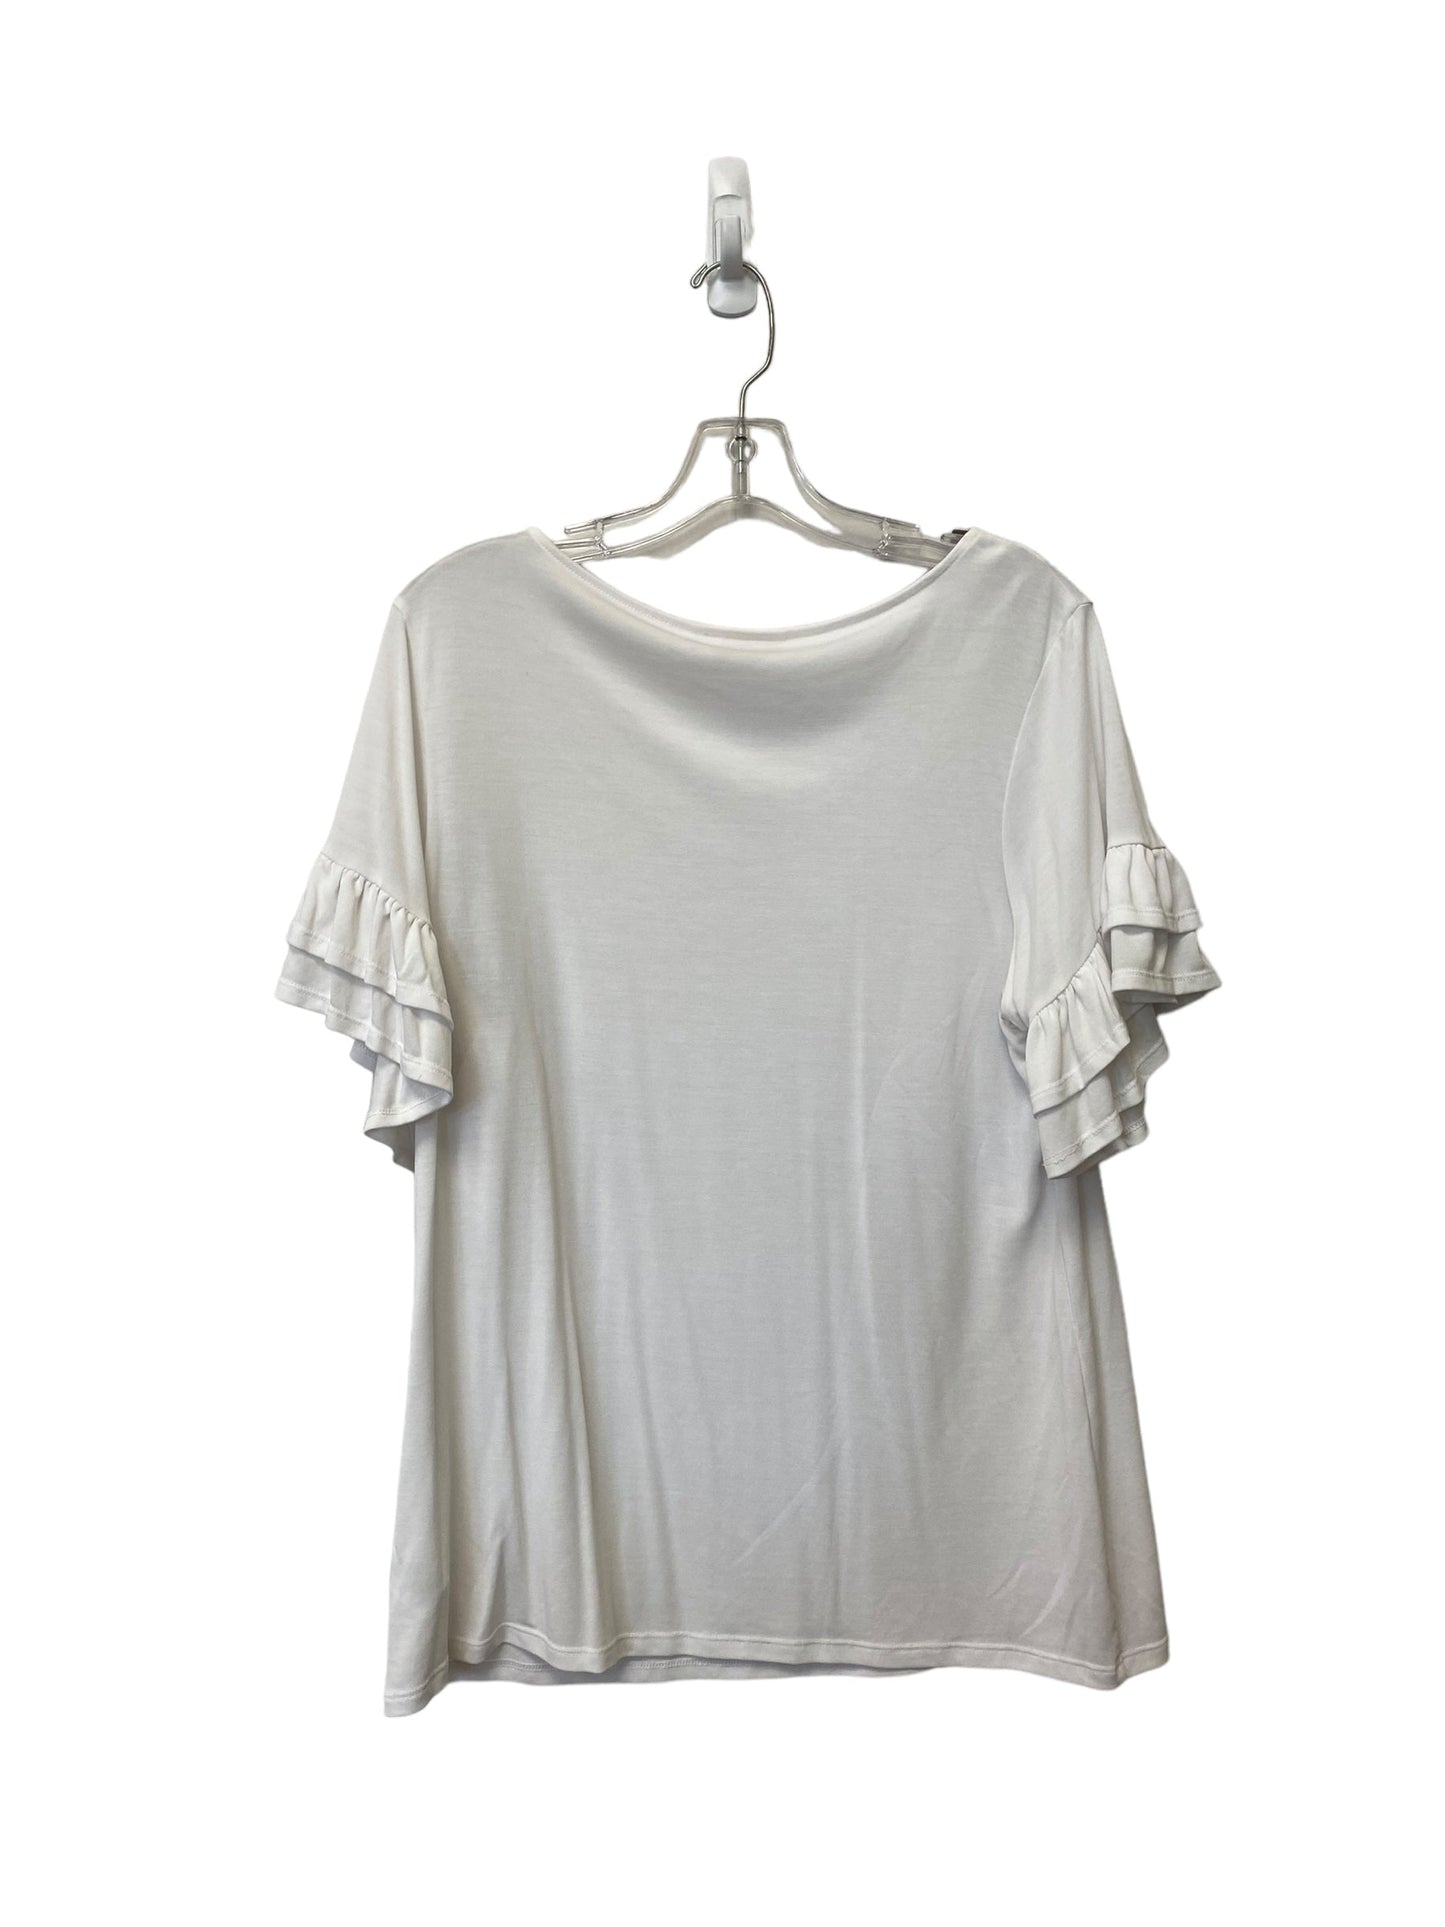 White Top Short Sleeve Time And Tru, Size L